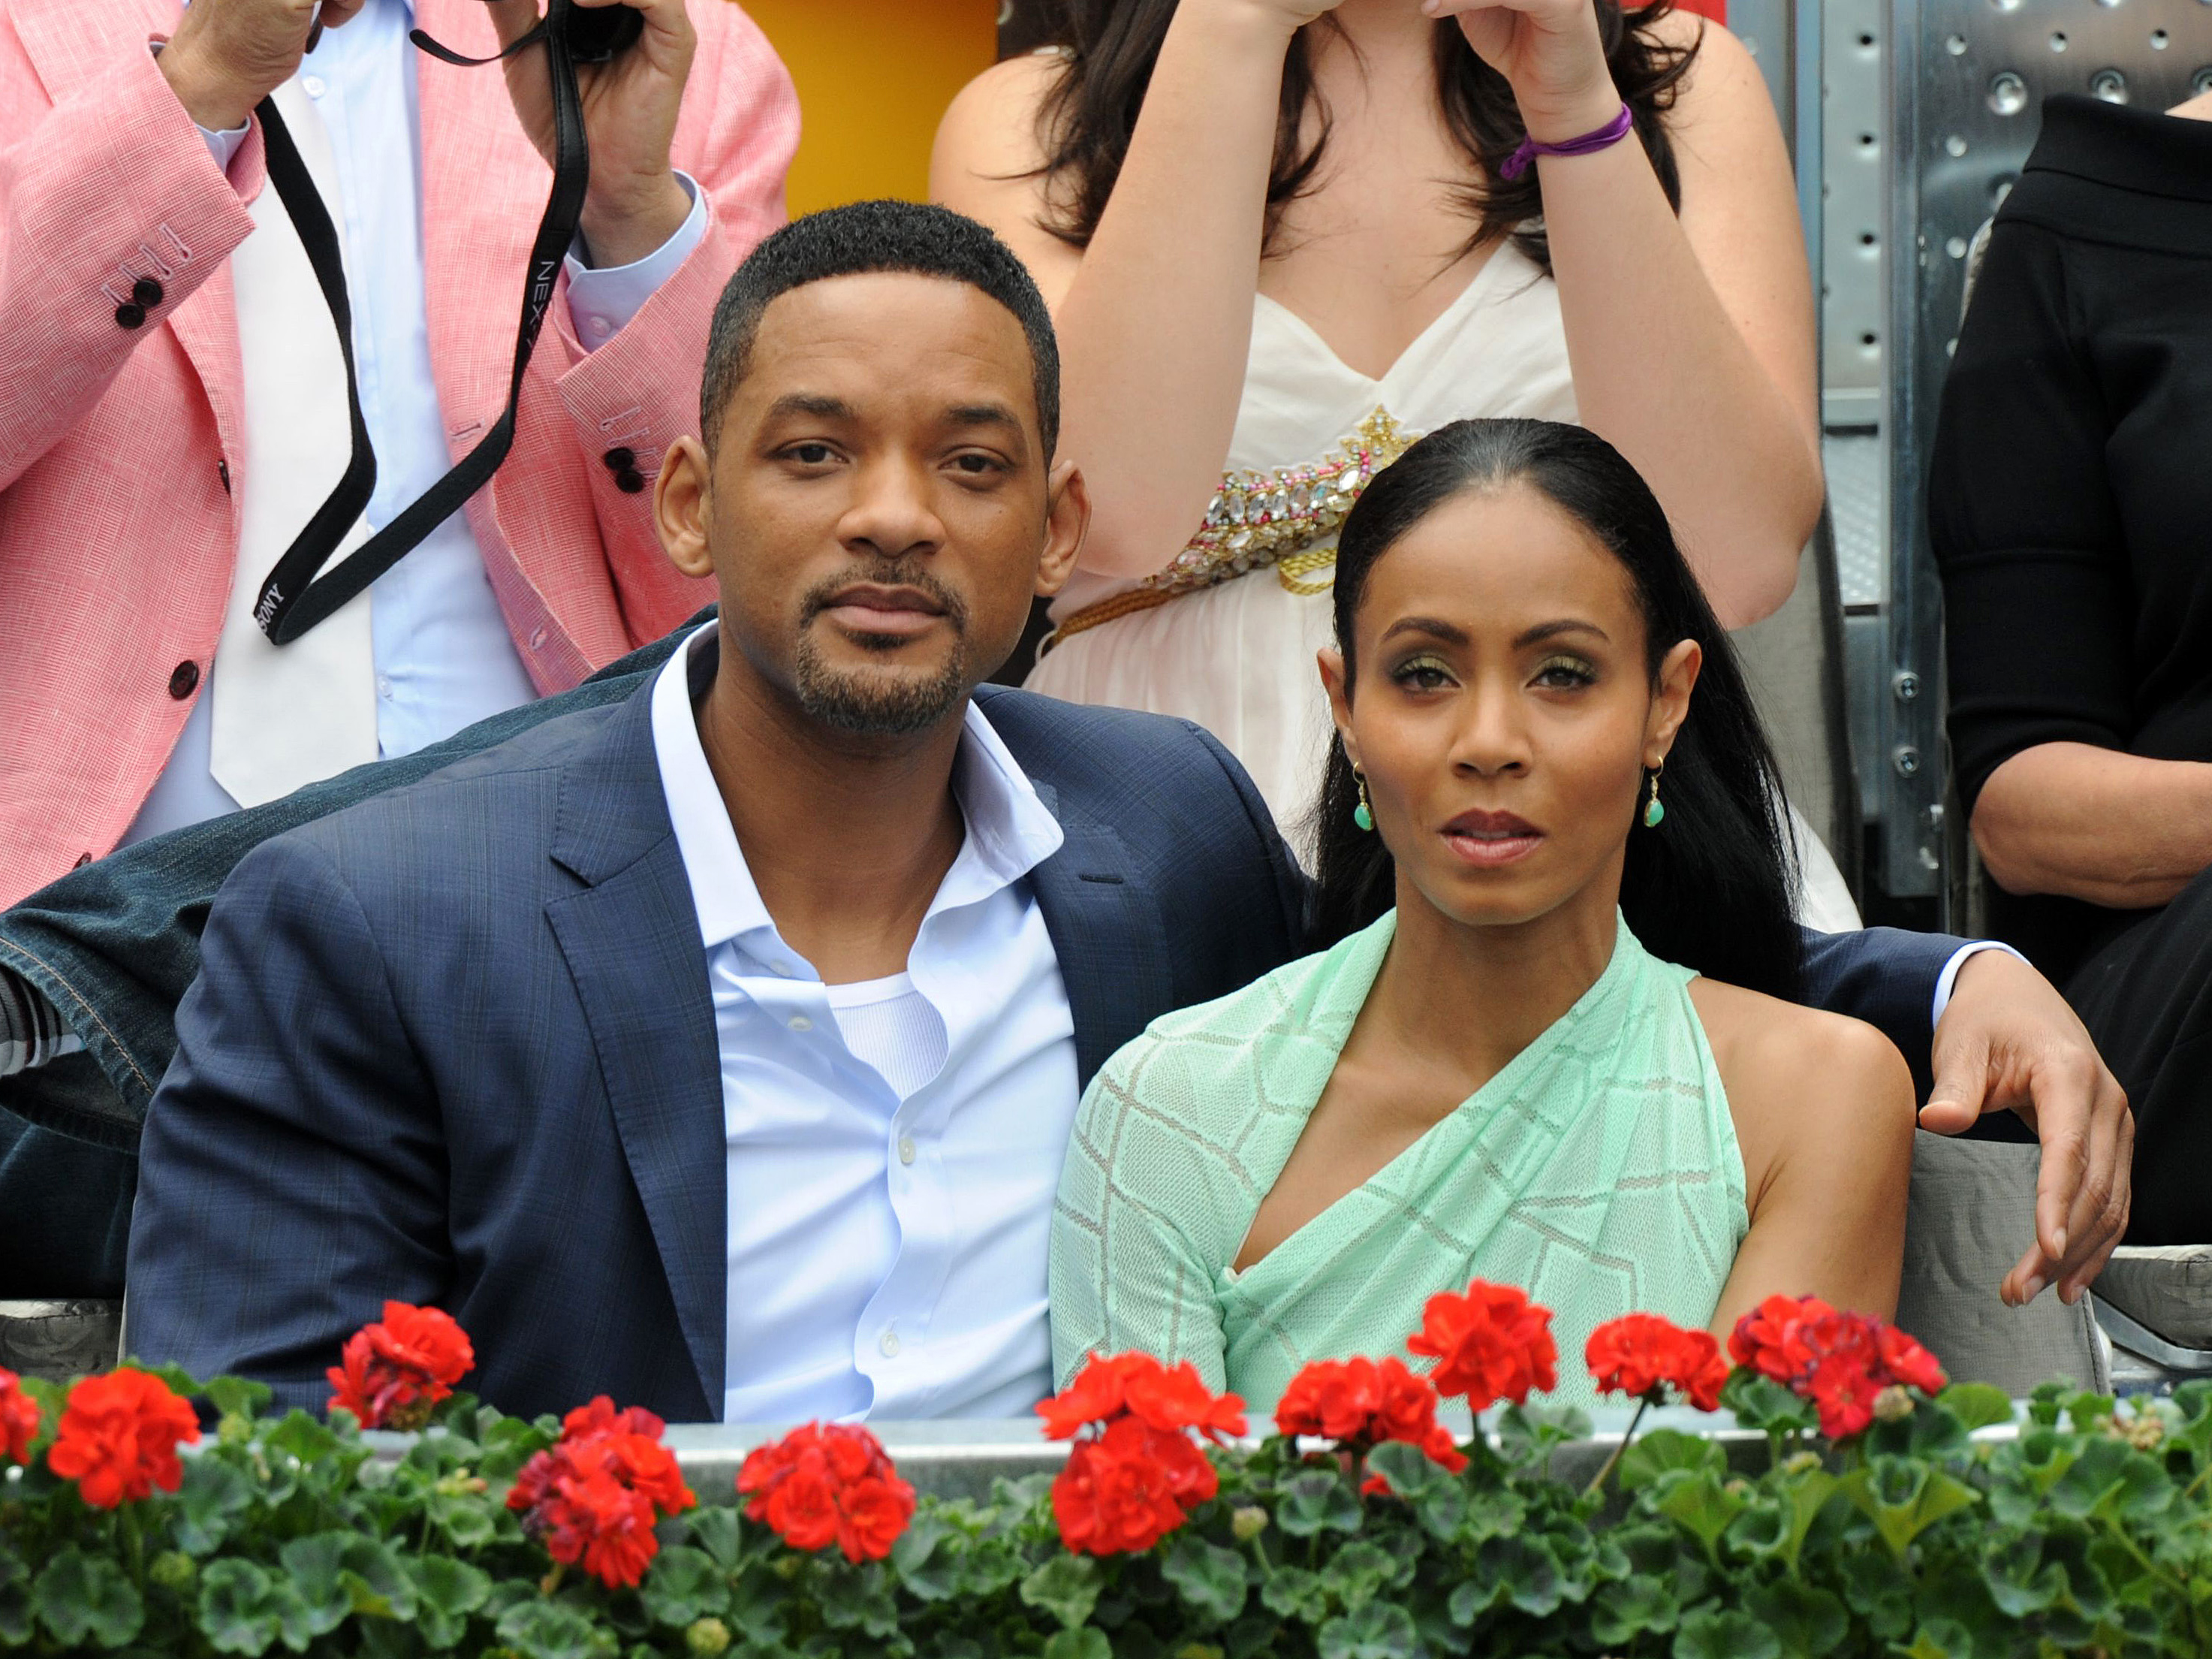 This Is How Will Smith Really Felt About Jada Pinkett-Smith's Relationship With Tupac